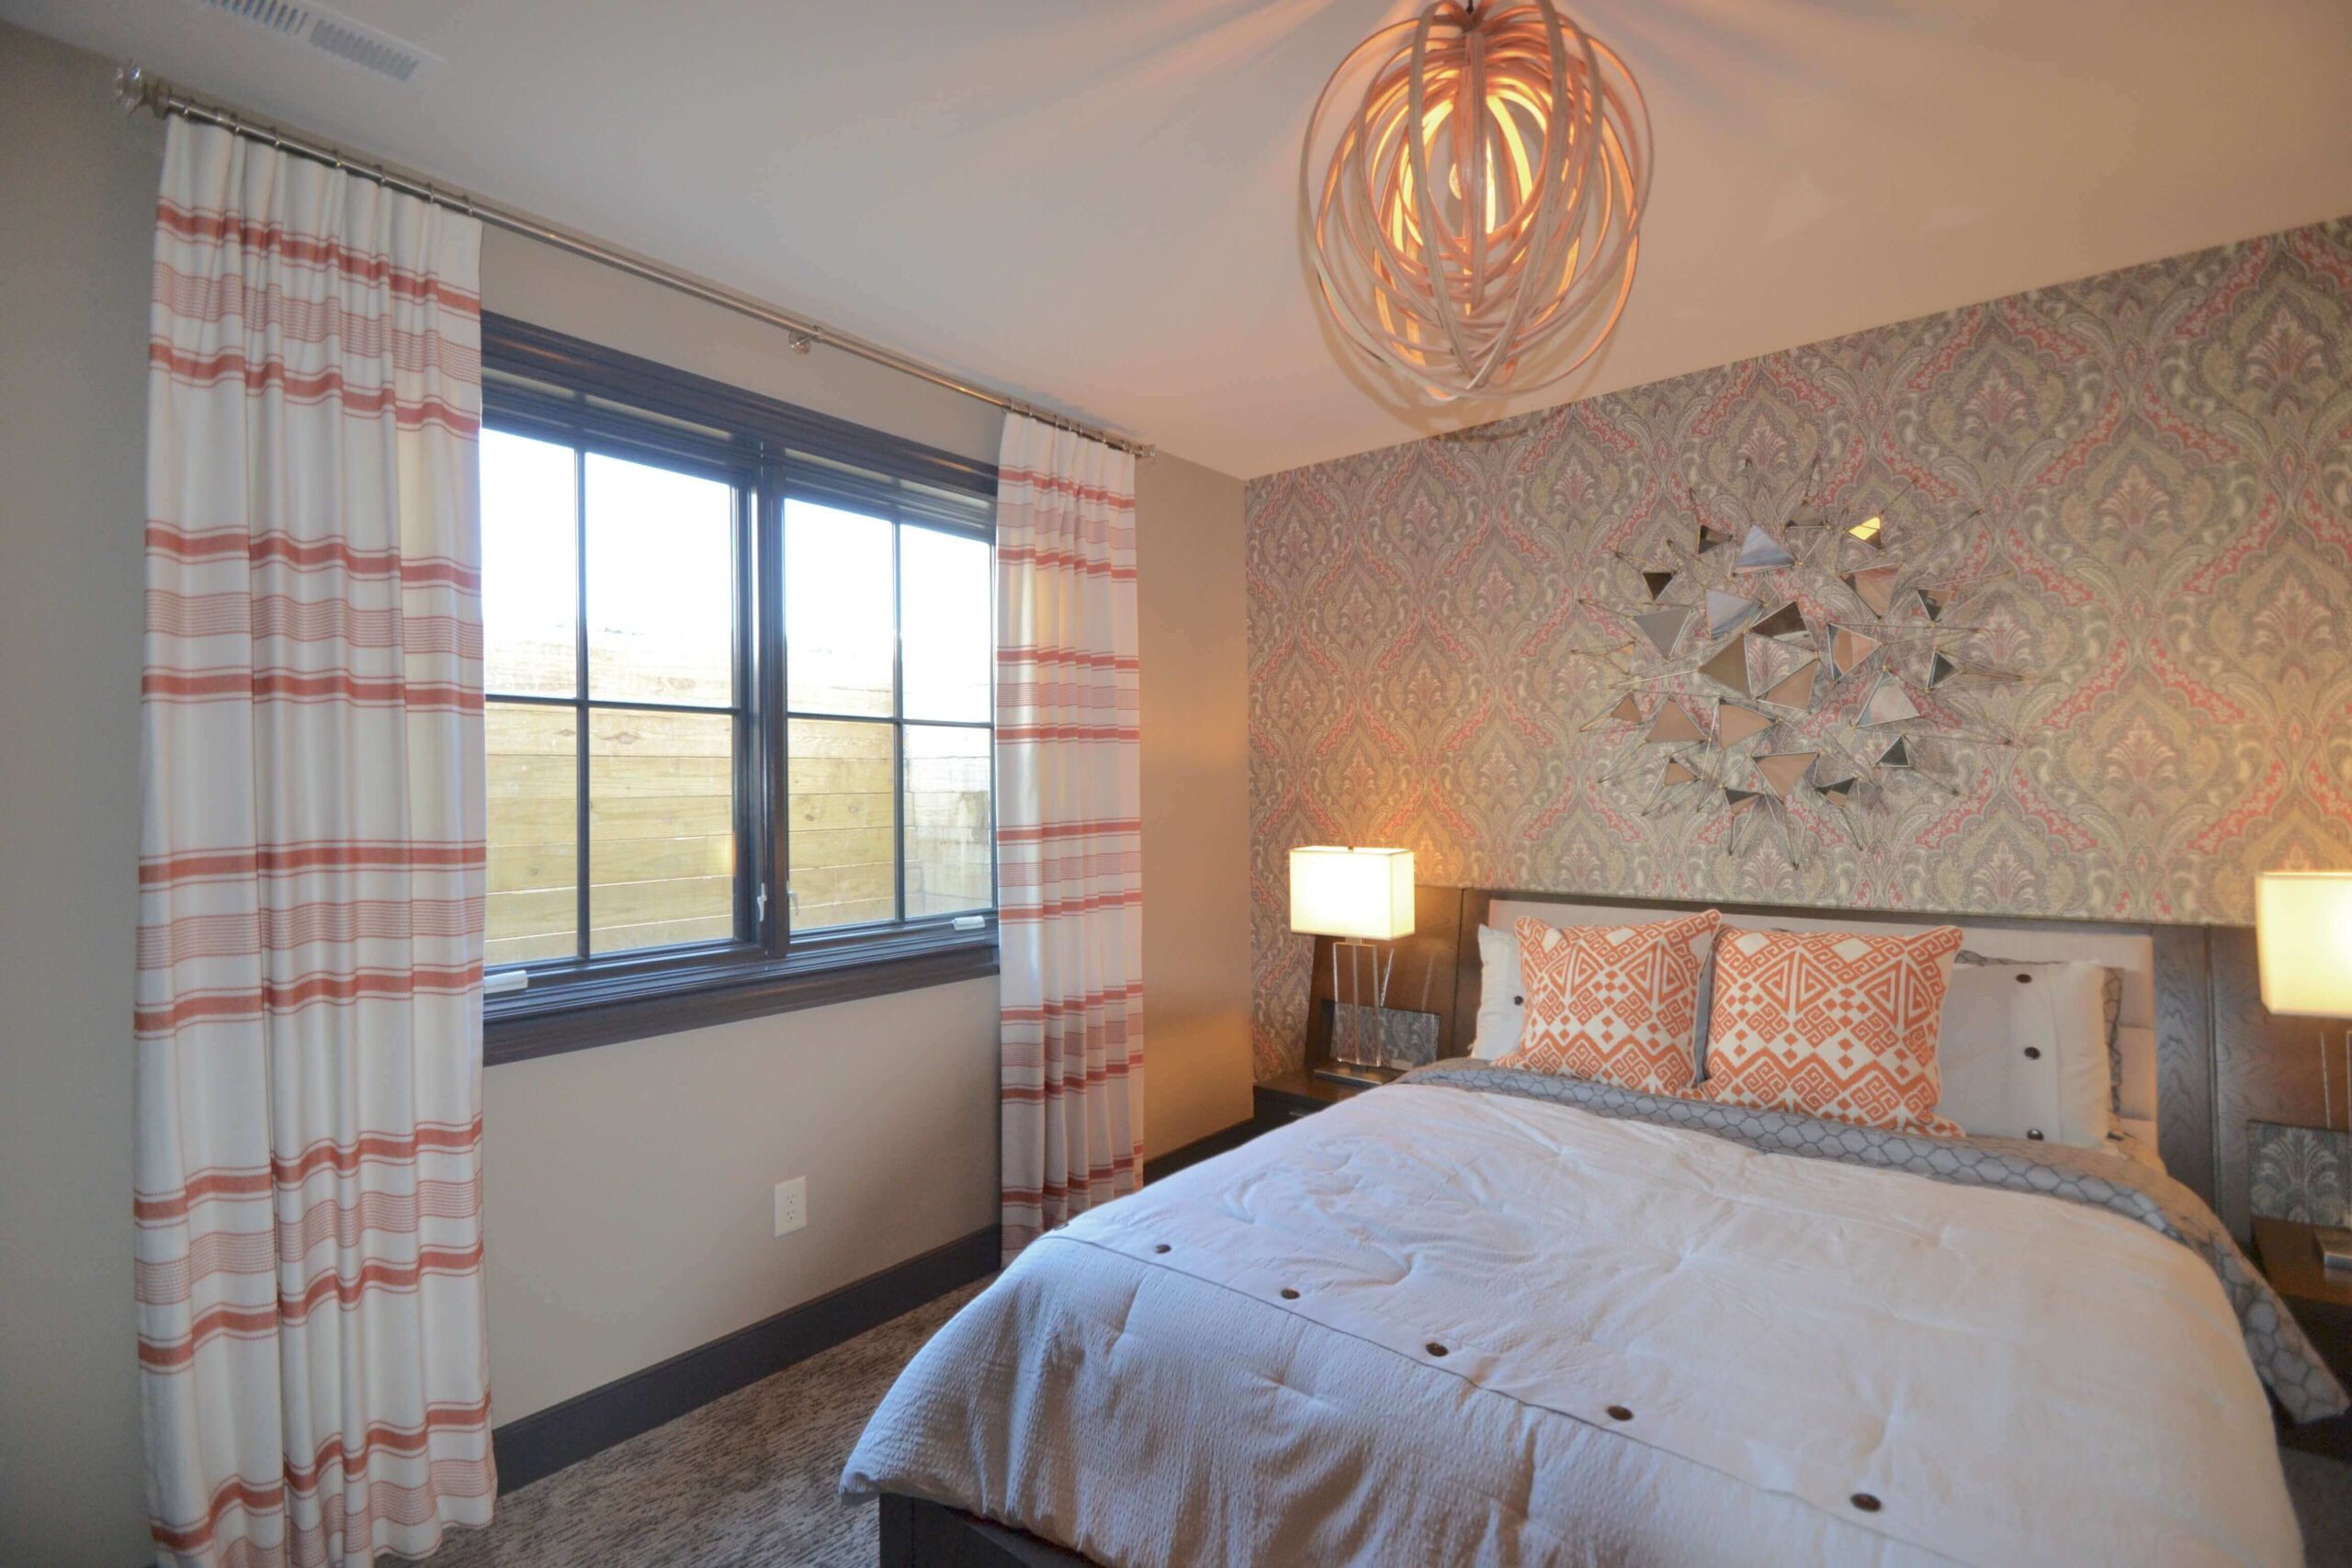 Home-a-Rama 2016 Gradison Home - Guest Bedroom with Mixed Patterns in Orange and Greys